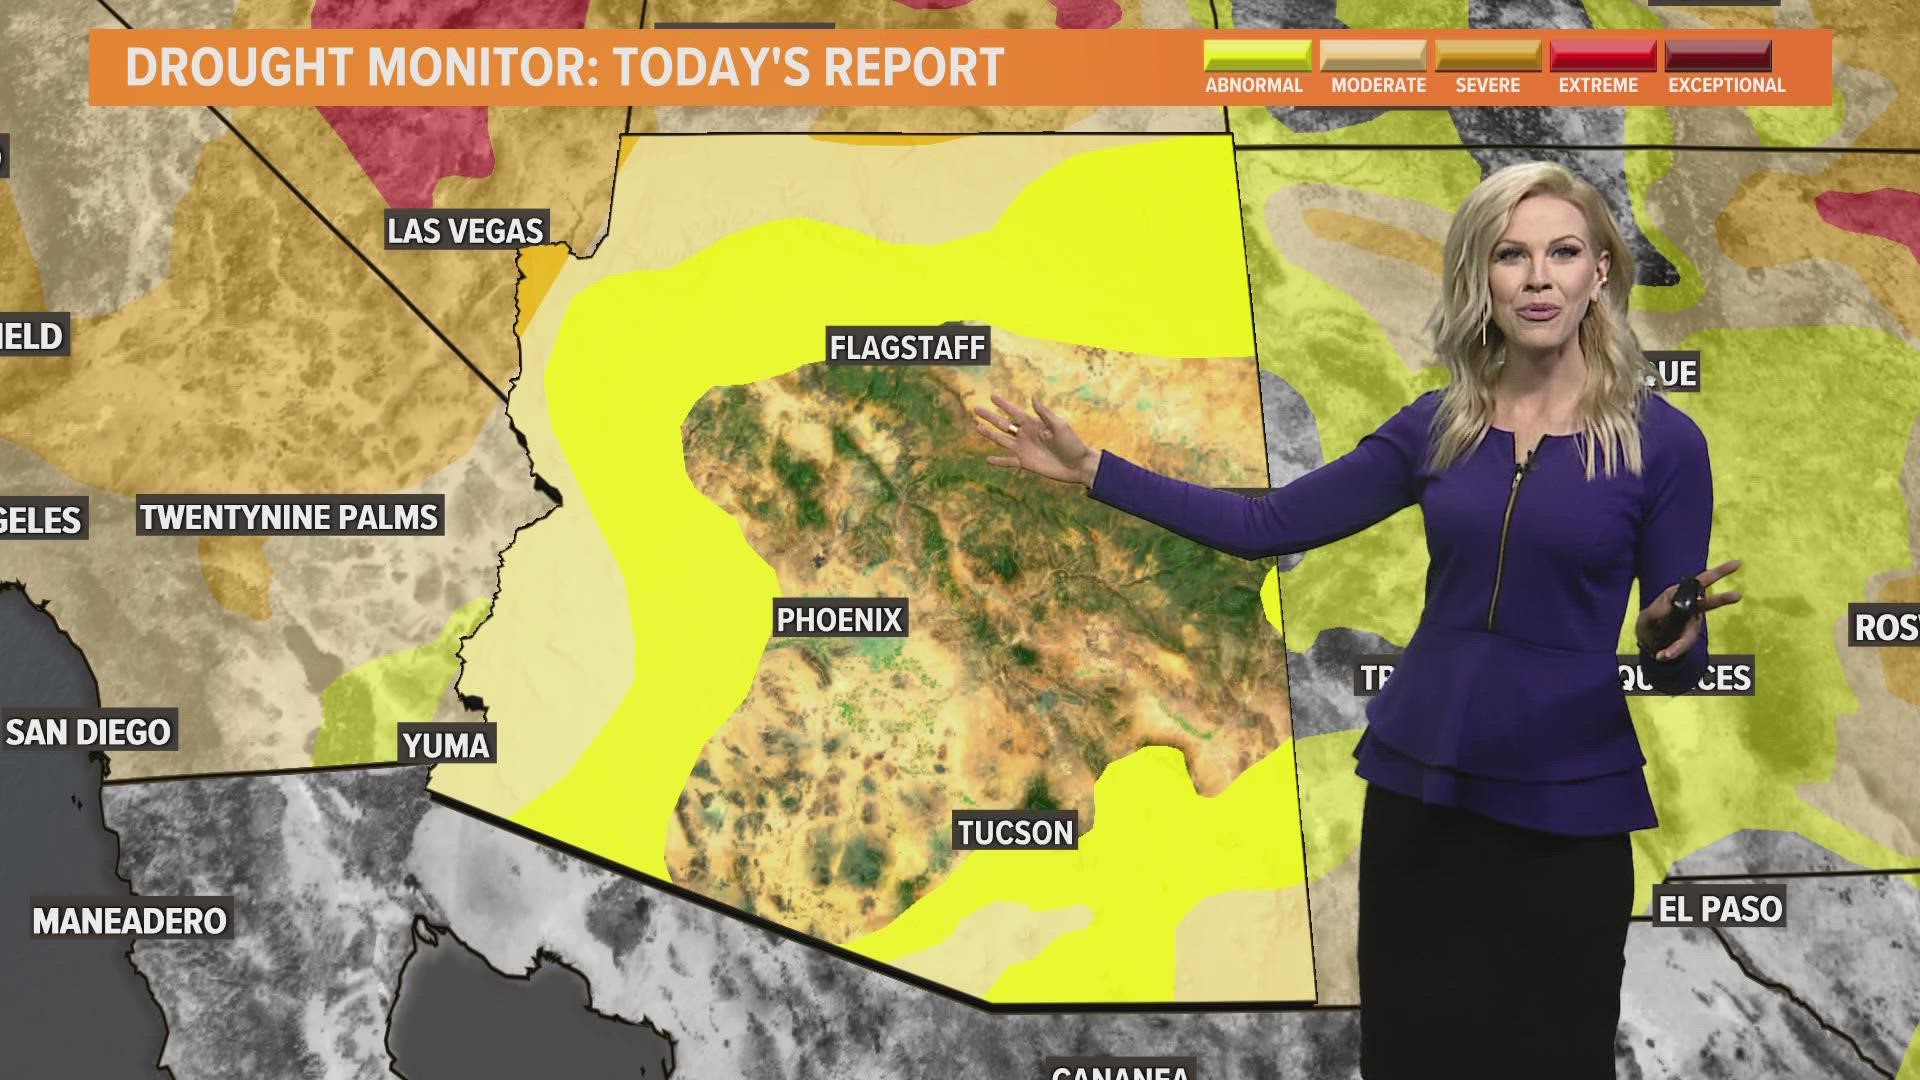 Krystle Henderson gives us a look at the Arizona drought monitor report for Jan. 19, 2023.